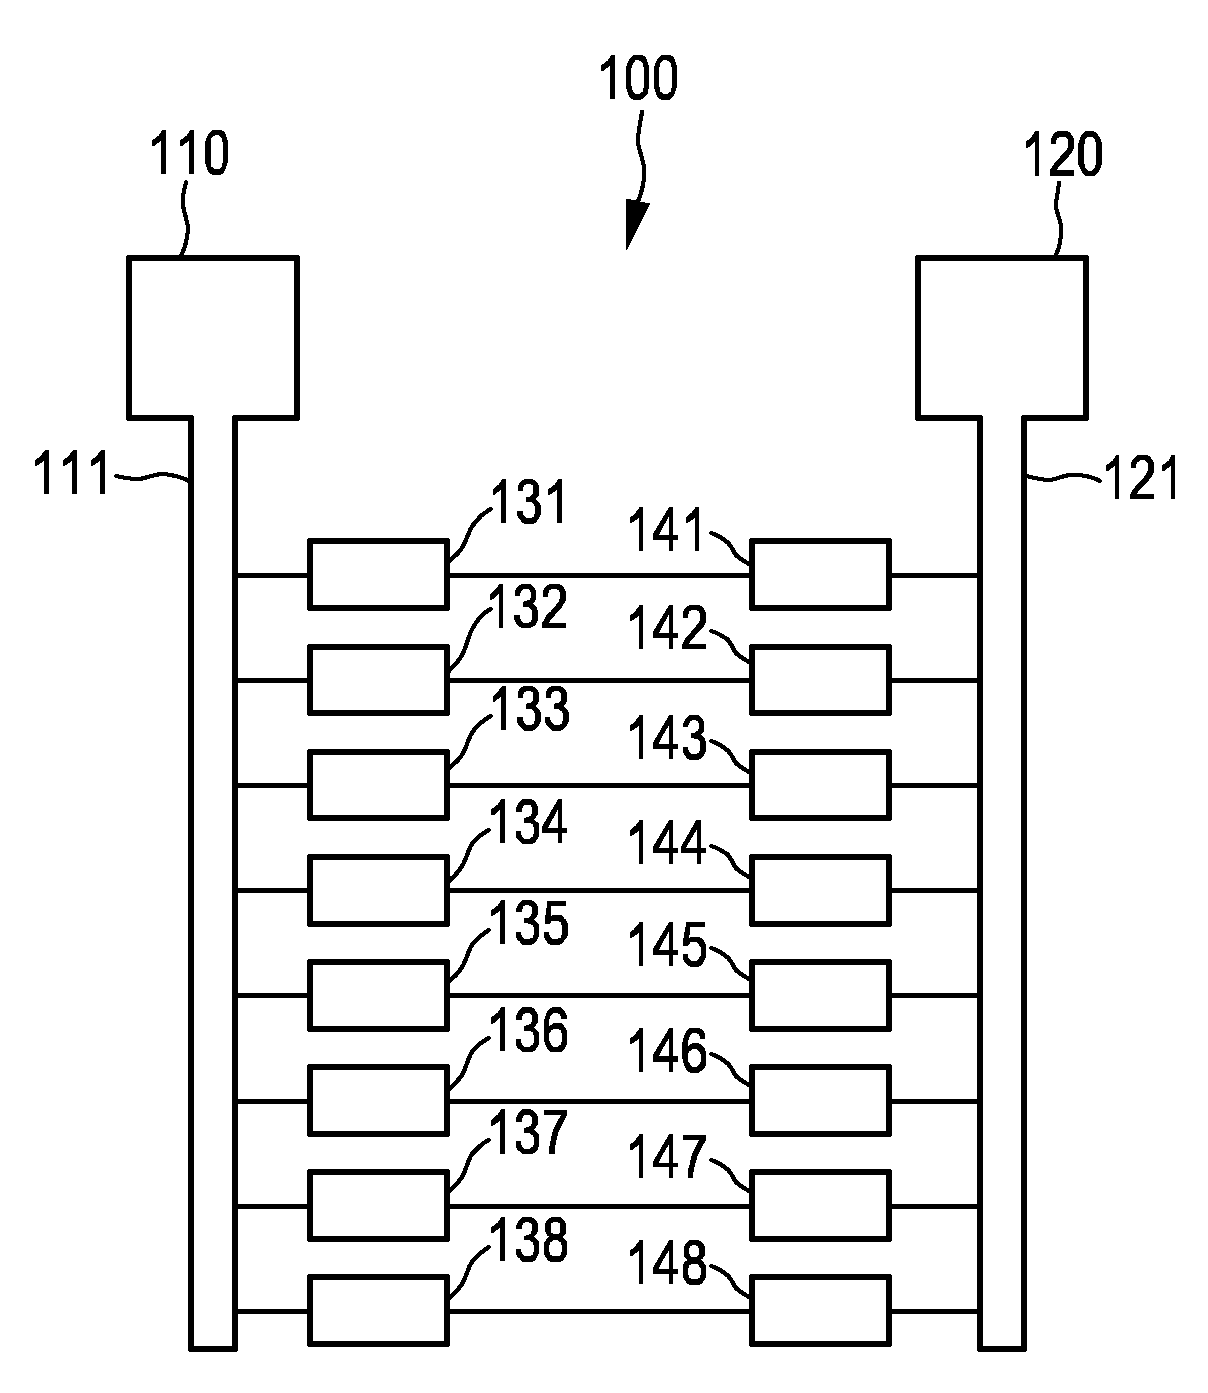 Test structure for detection of defect devices with lowered resistance